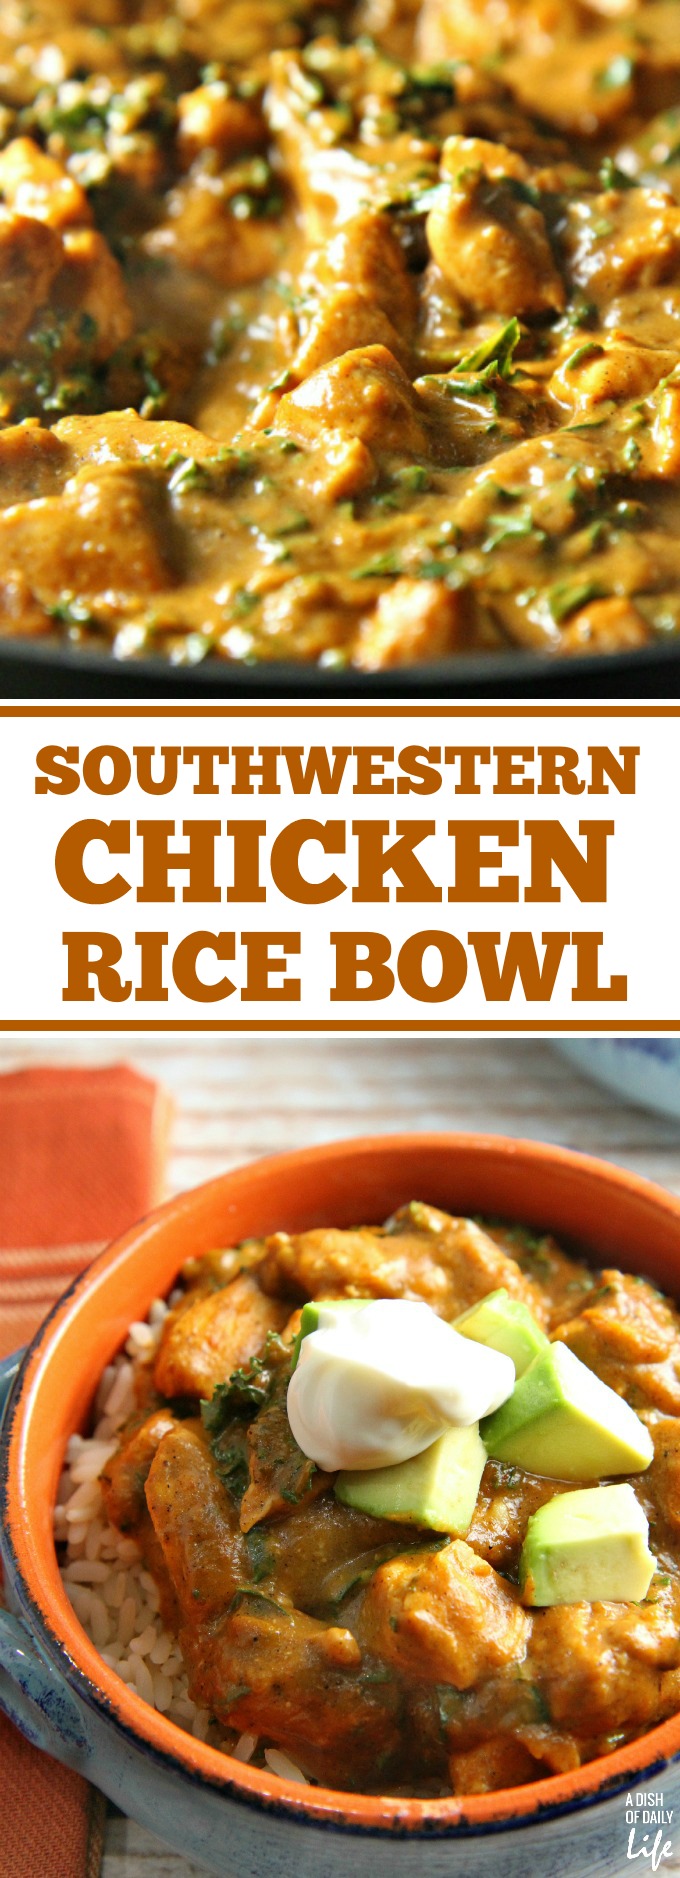 This healthy Southwestern Chicken Rice Bowl features seasonal vegetables with the Butternut Squash red enchilada sauce and kale. An easy meal, the sauce recipe makes enough for two dinners, allowing you to freeze it for another night or double up your recipe! Perfect for Mexican night!